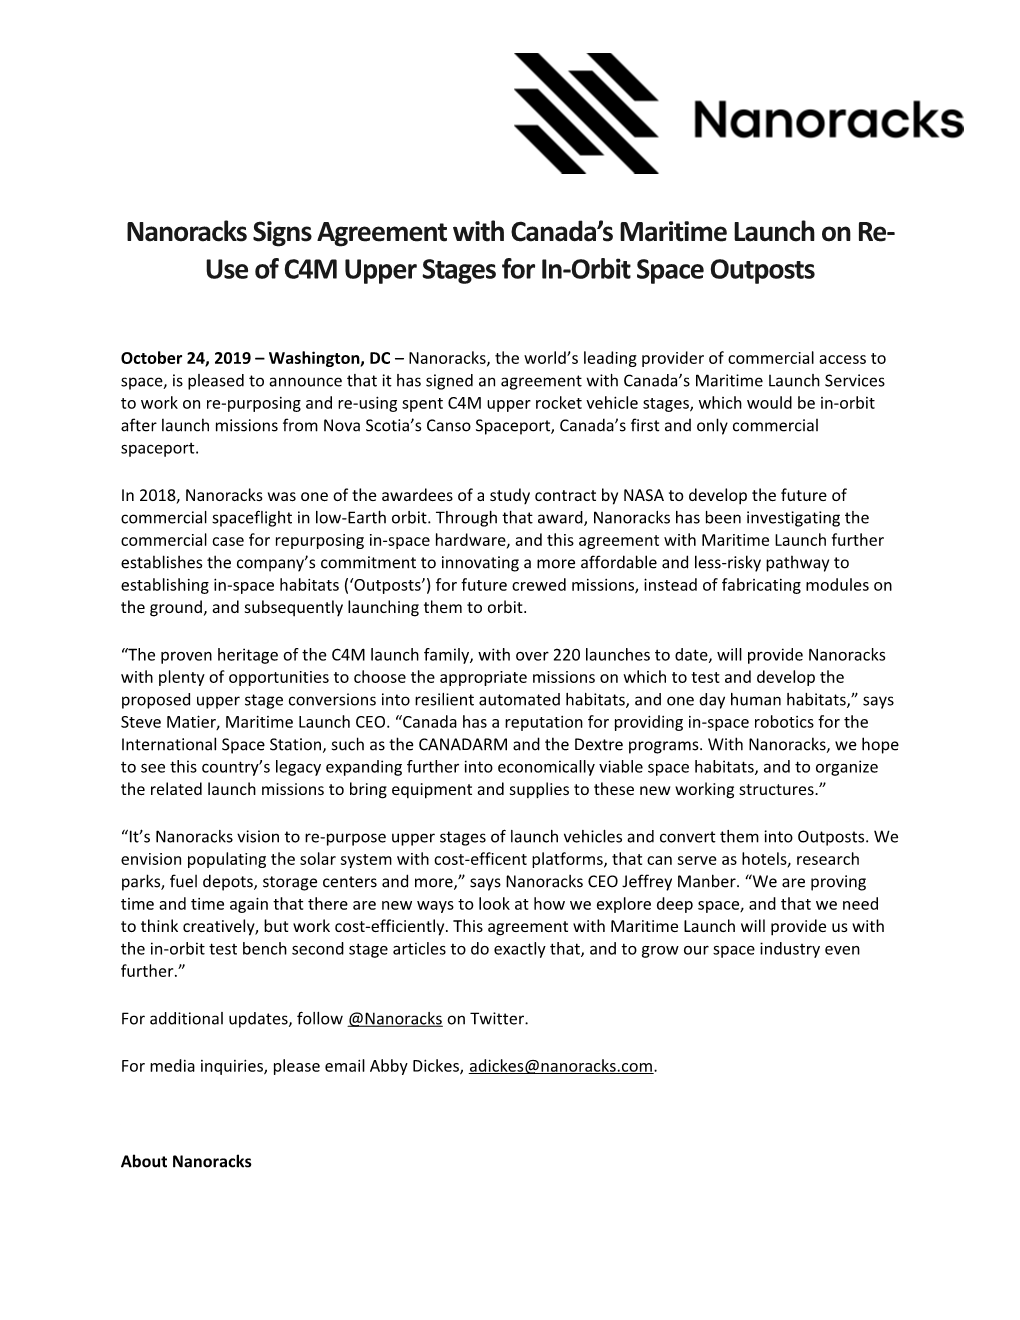 Nanoracks Signs Agreement with Canada's Maritime Launch on Re